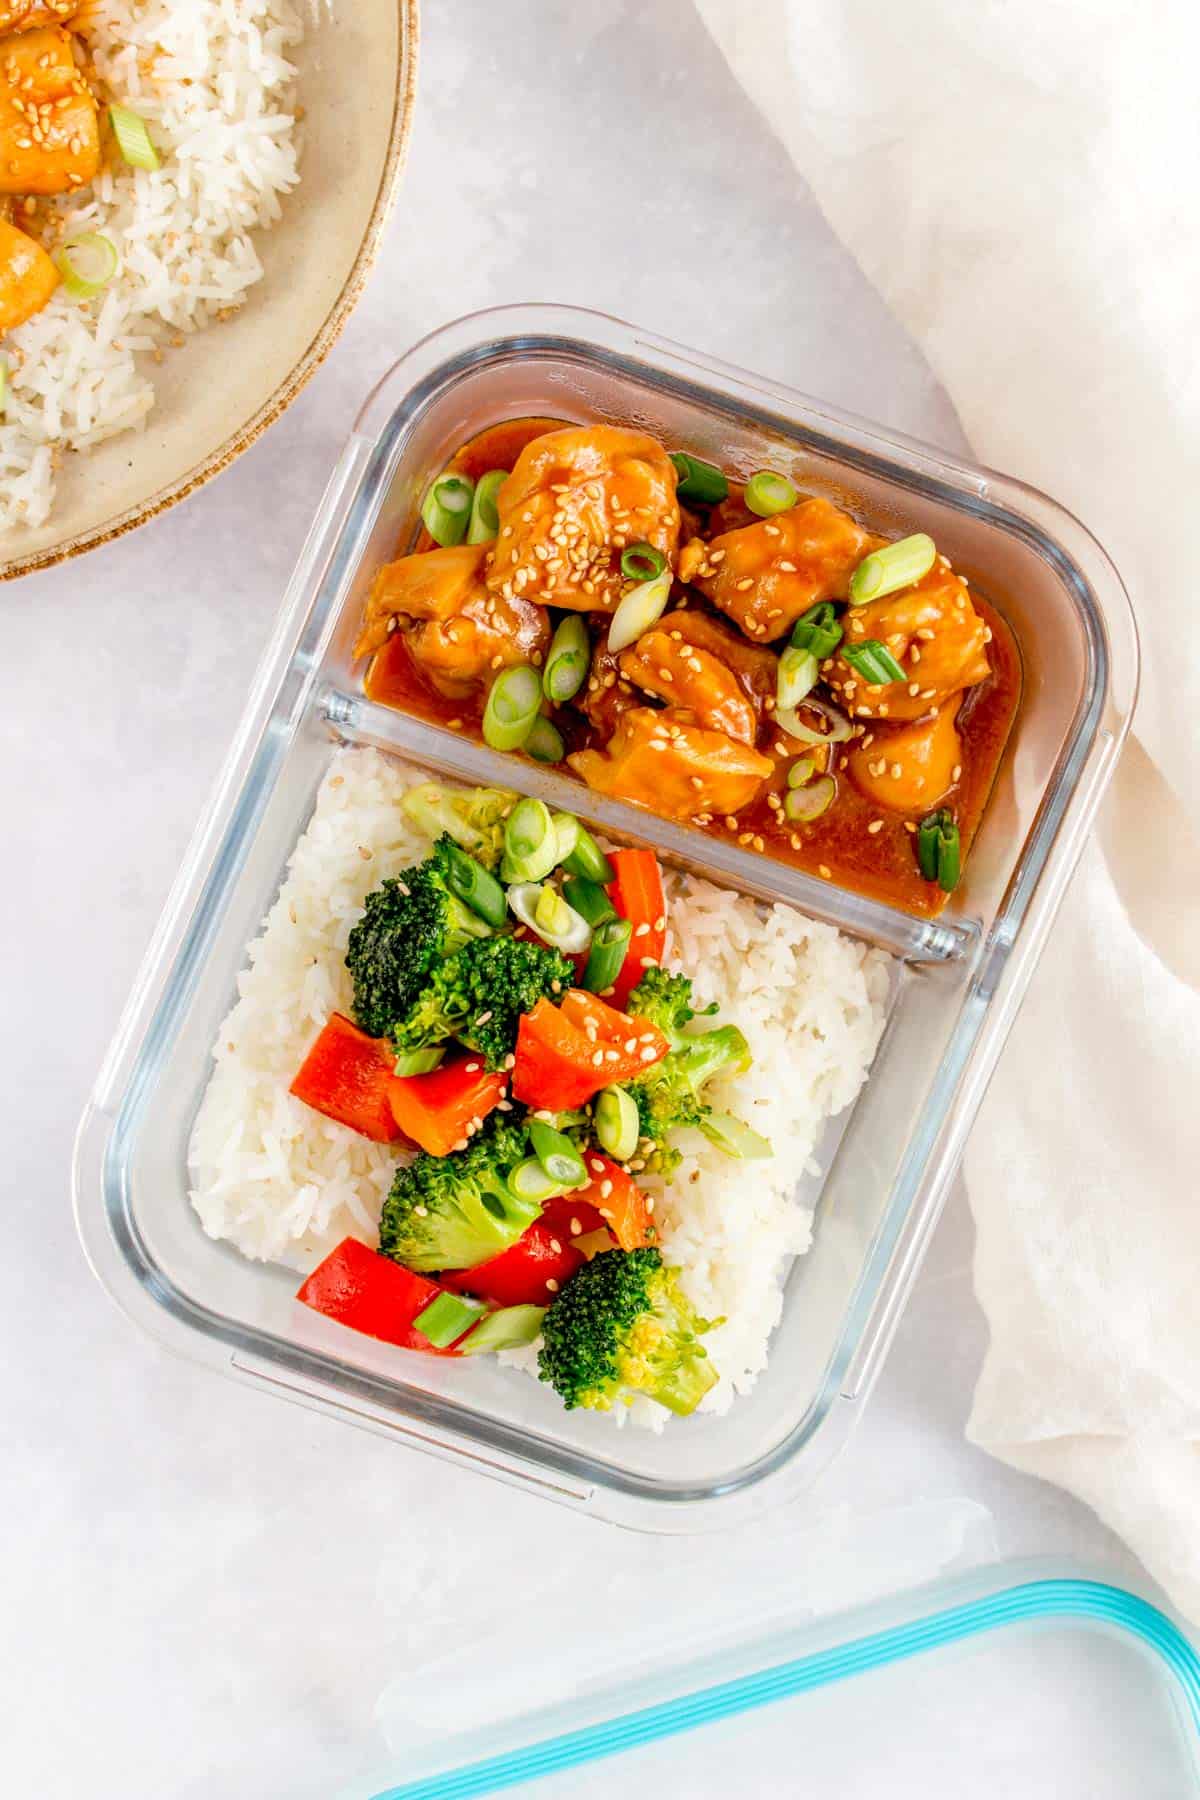 Meal prep container with sesame chicken and vegetables over rice.